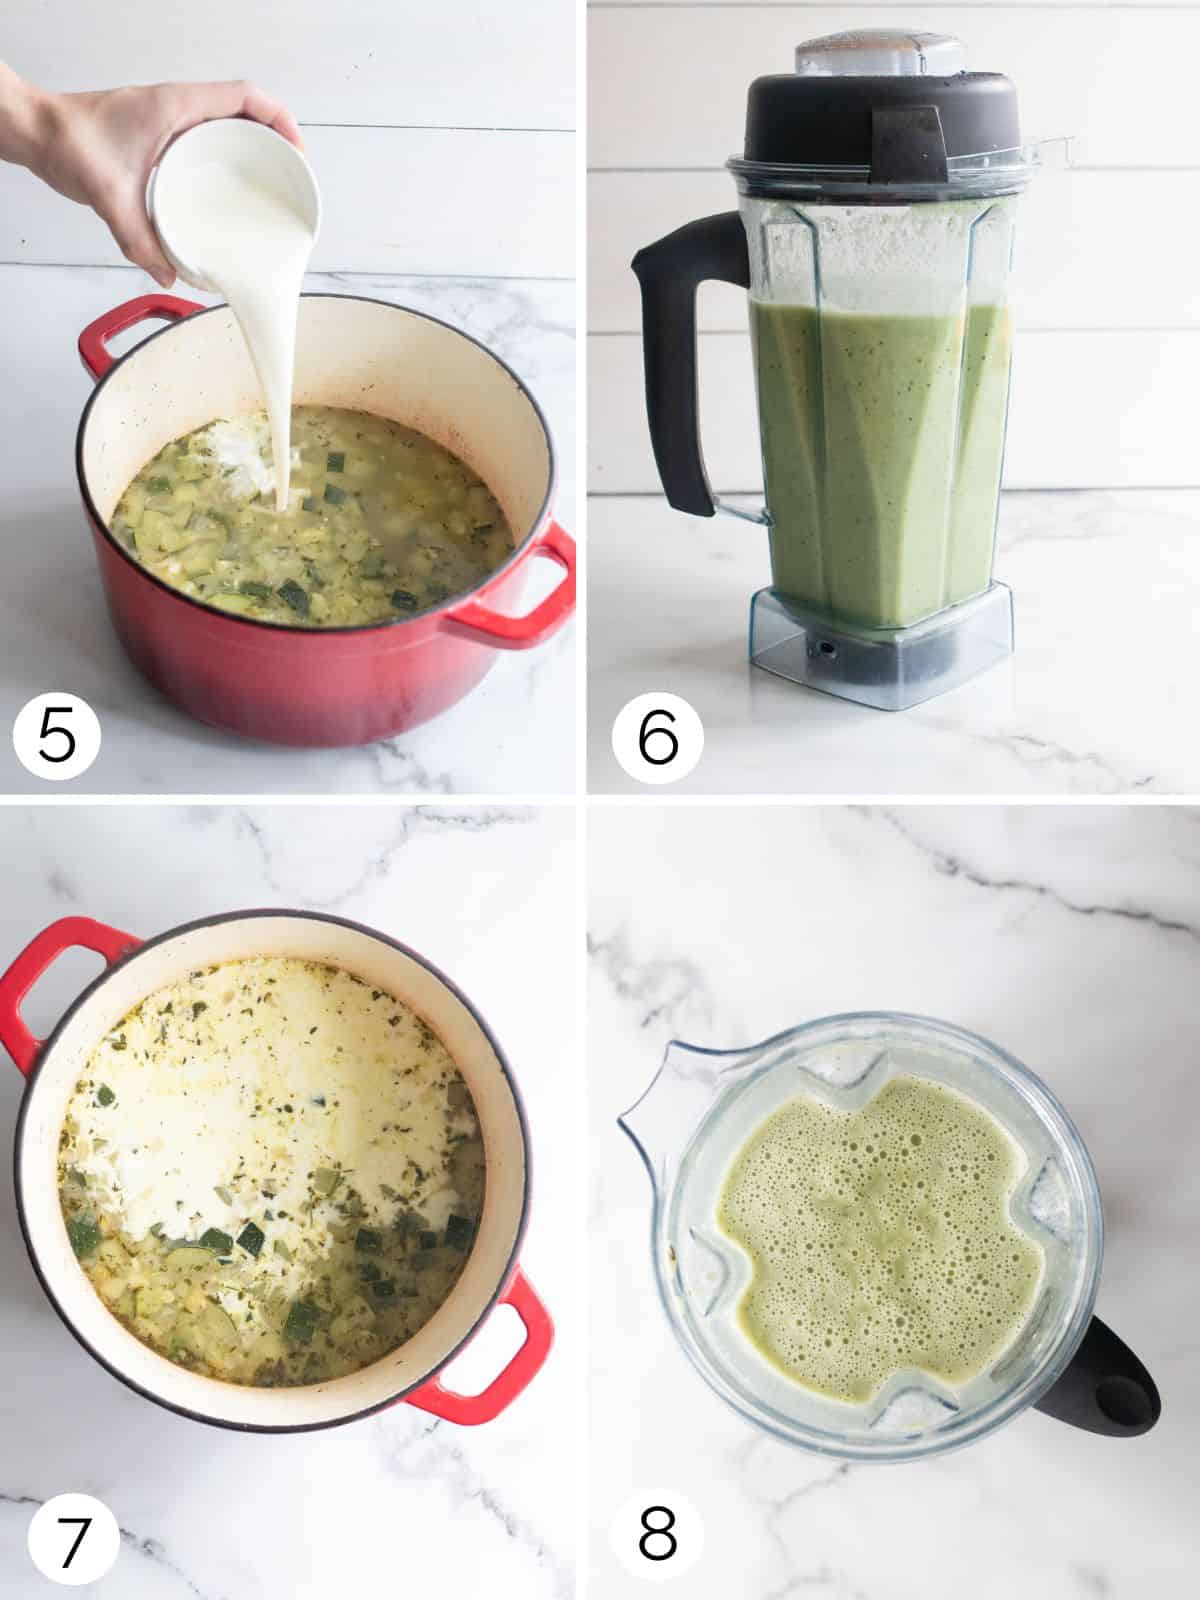 Pouring cream into the zucchini soup, then blending it in a blender.